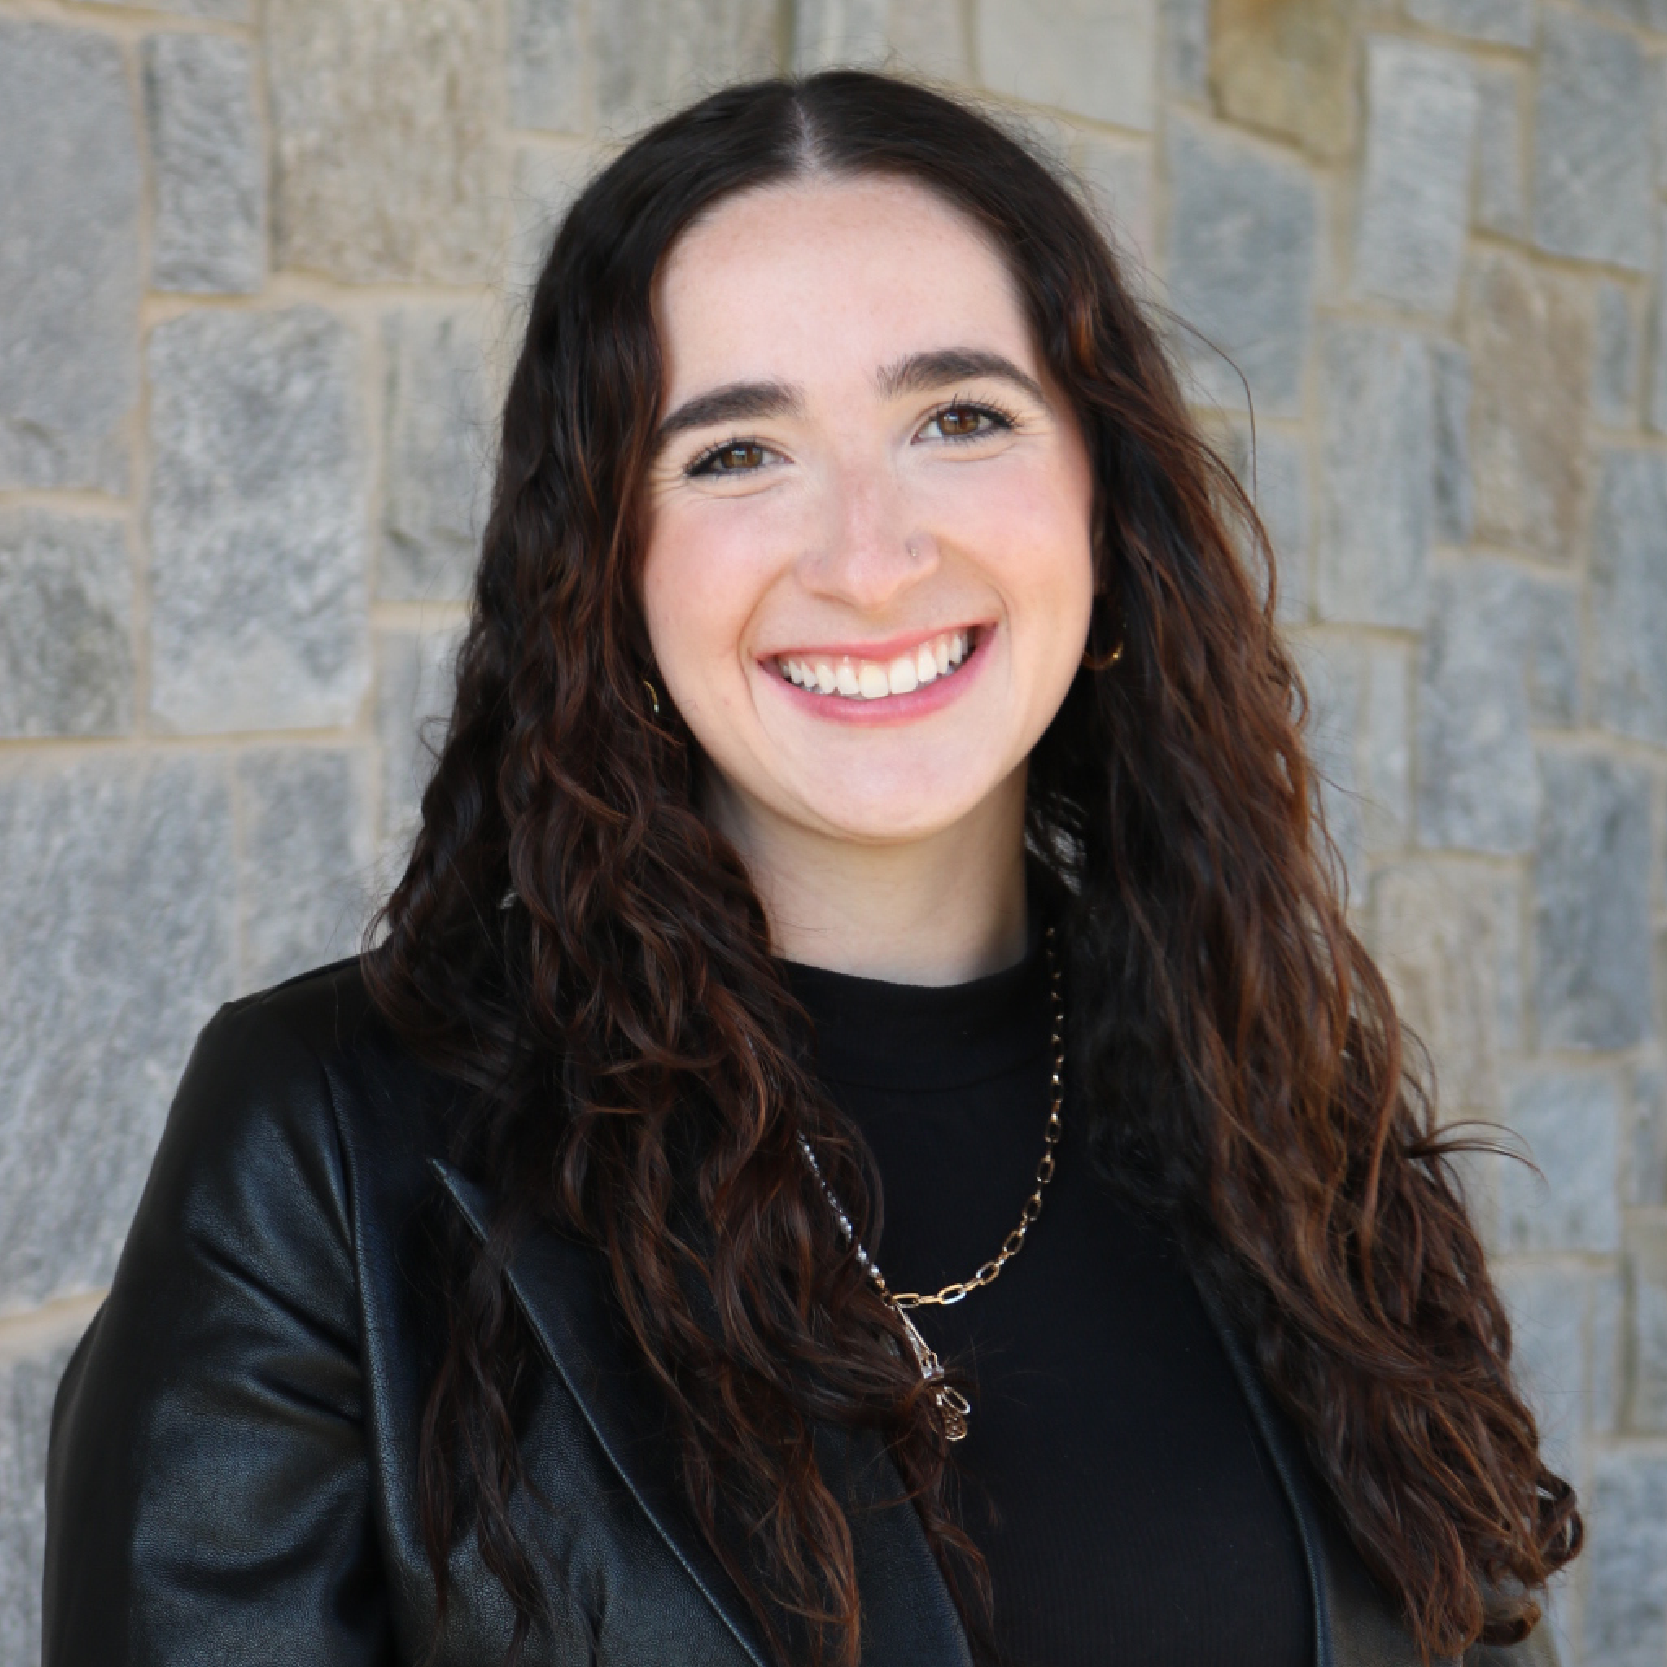 The Marist College Institute for Public Opinion Excellence Award – Victoria Palmer Howard